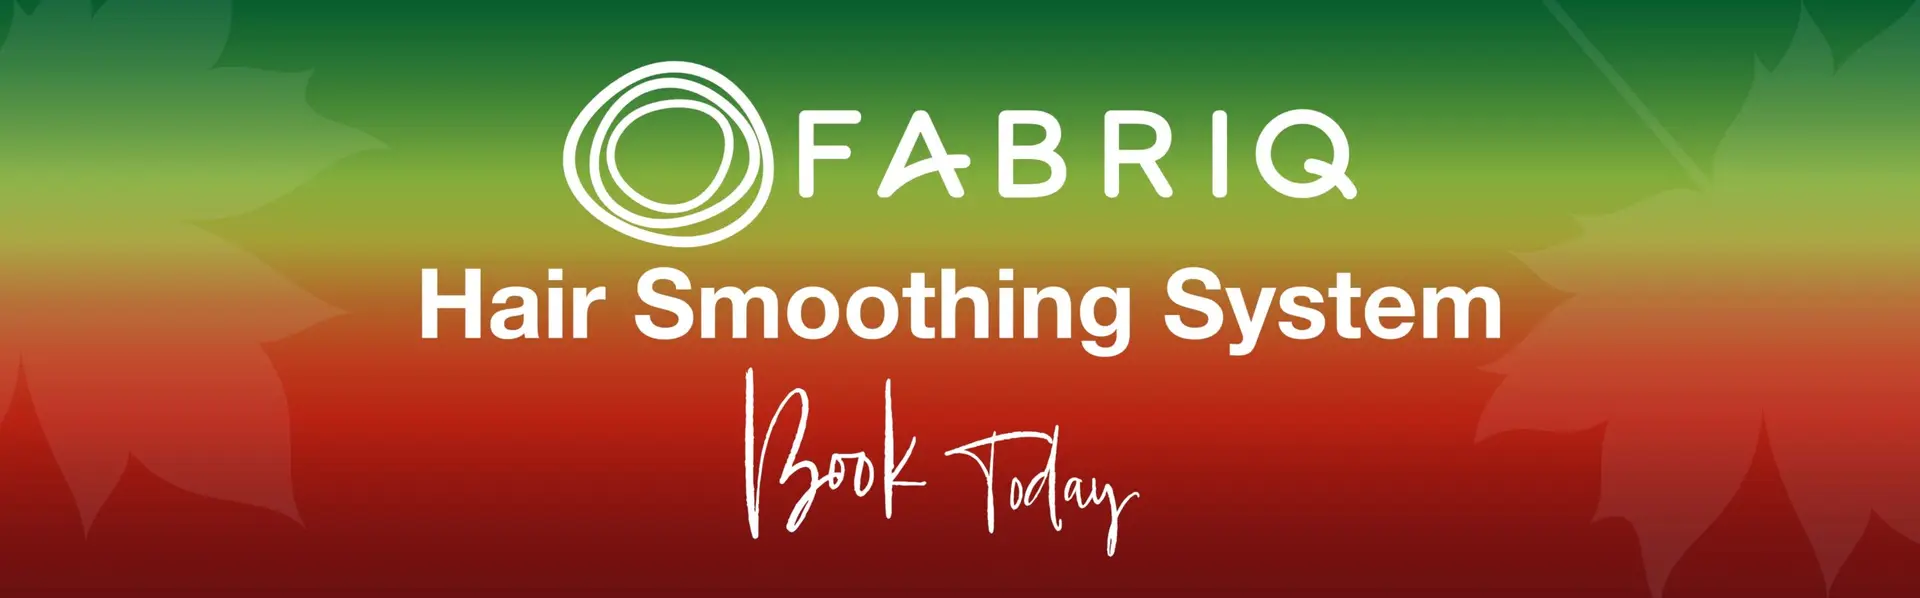 Fabriq hair smoothing system banner